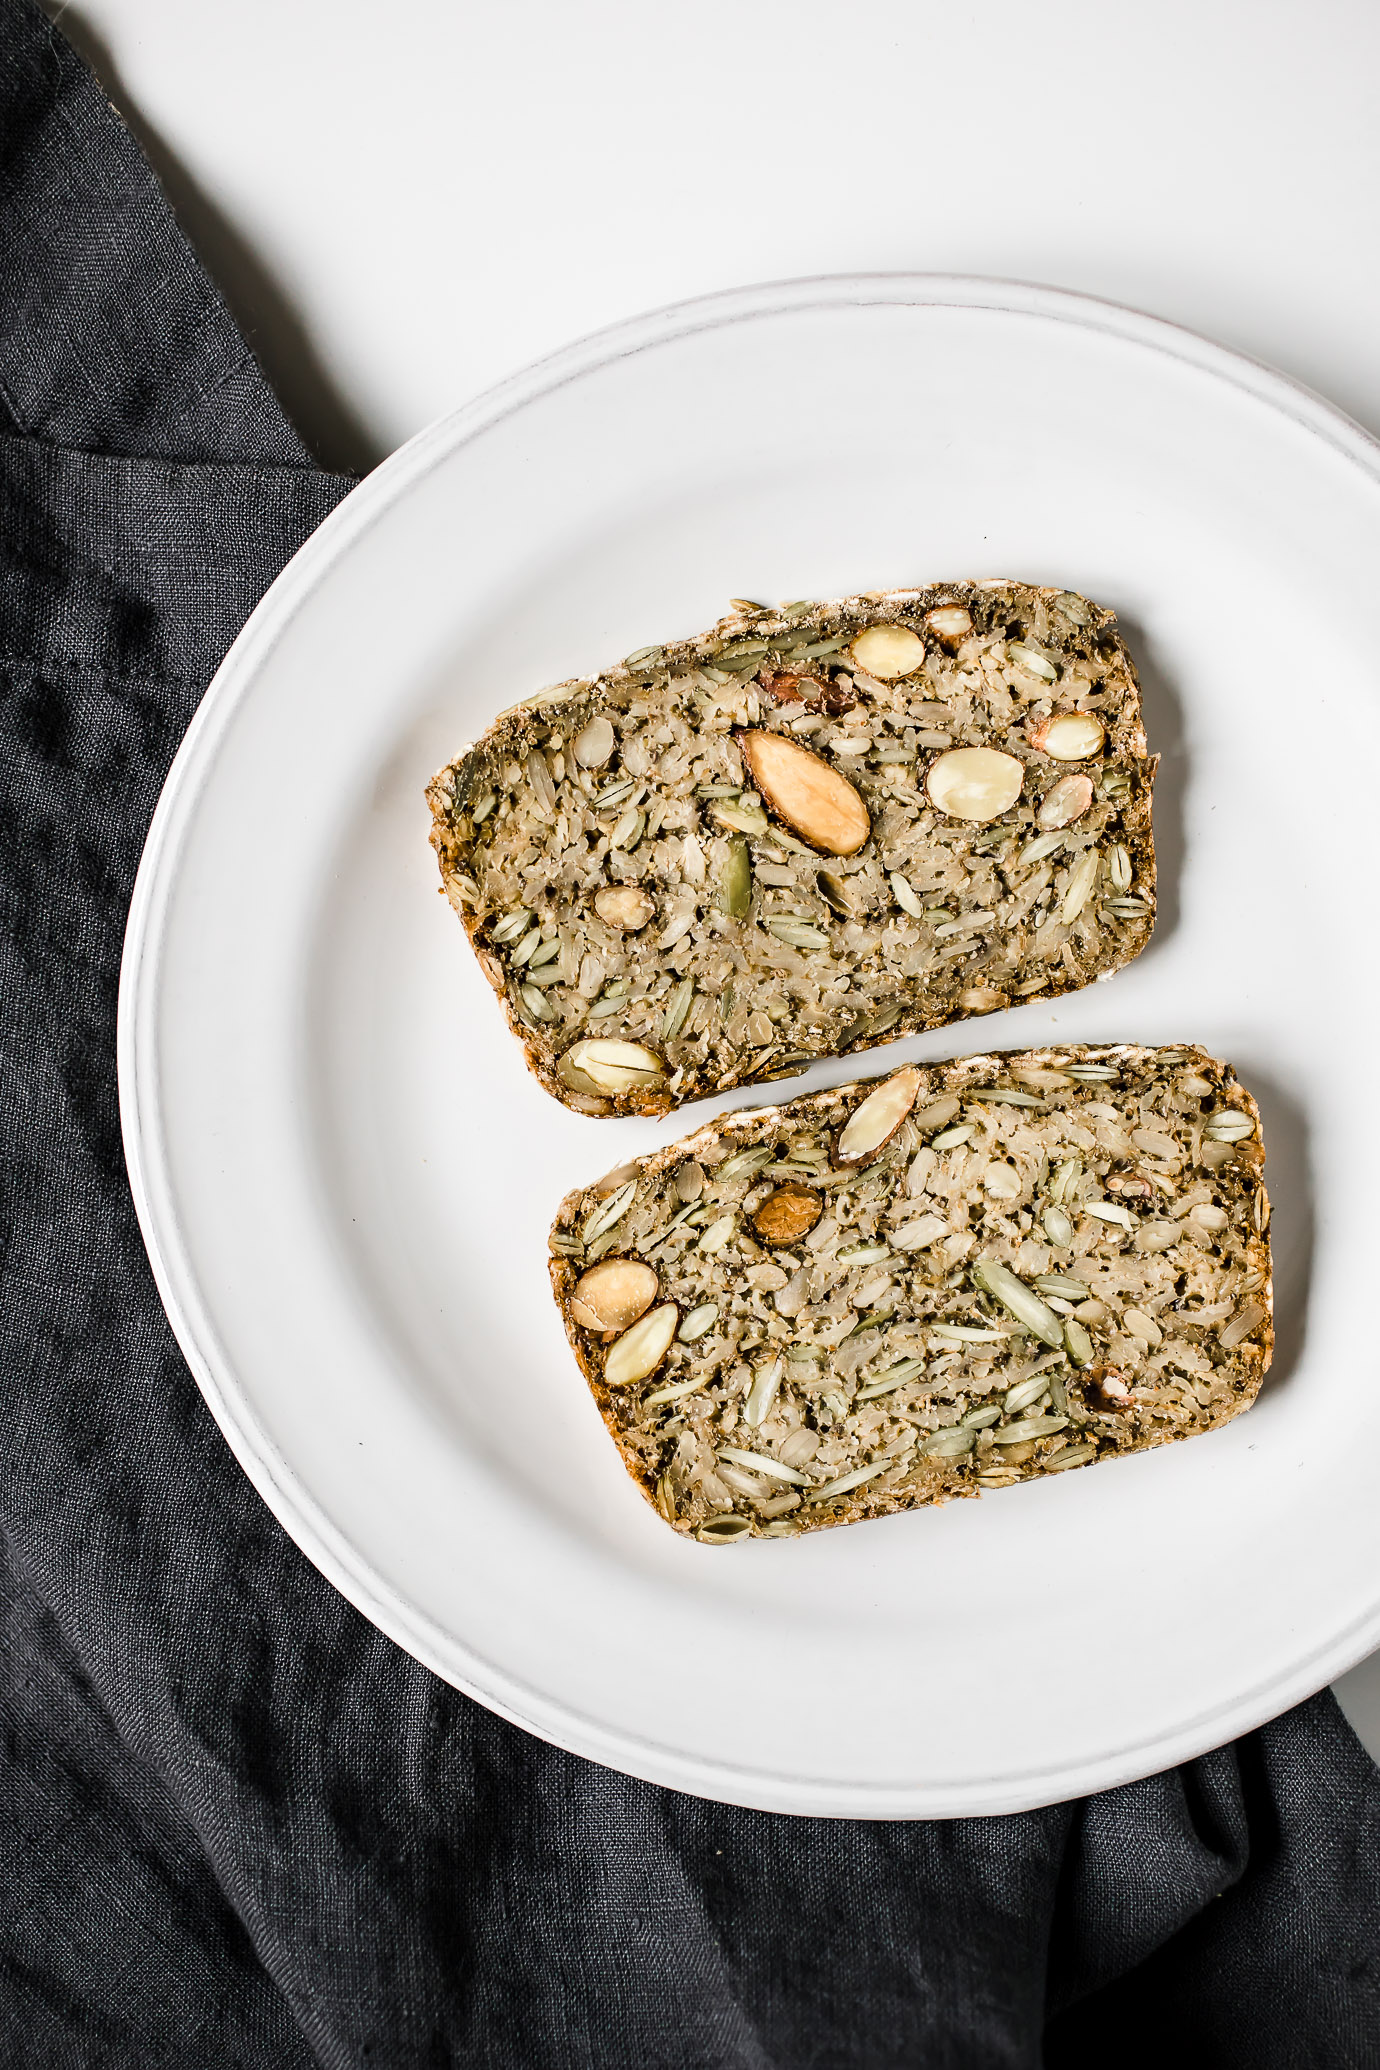 vegan nut and seed bread slices on plate